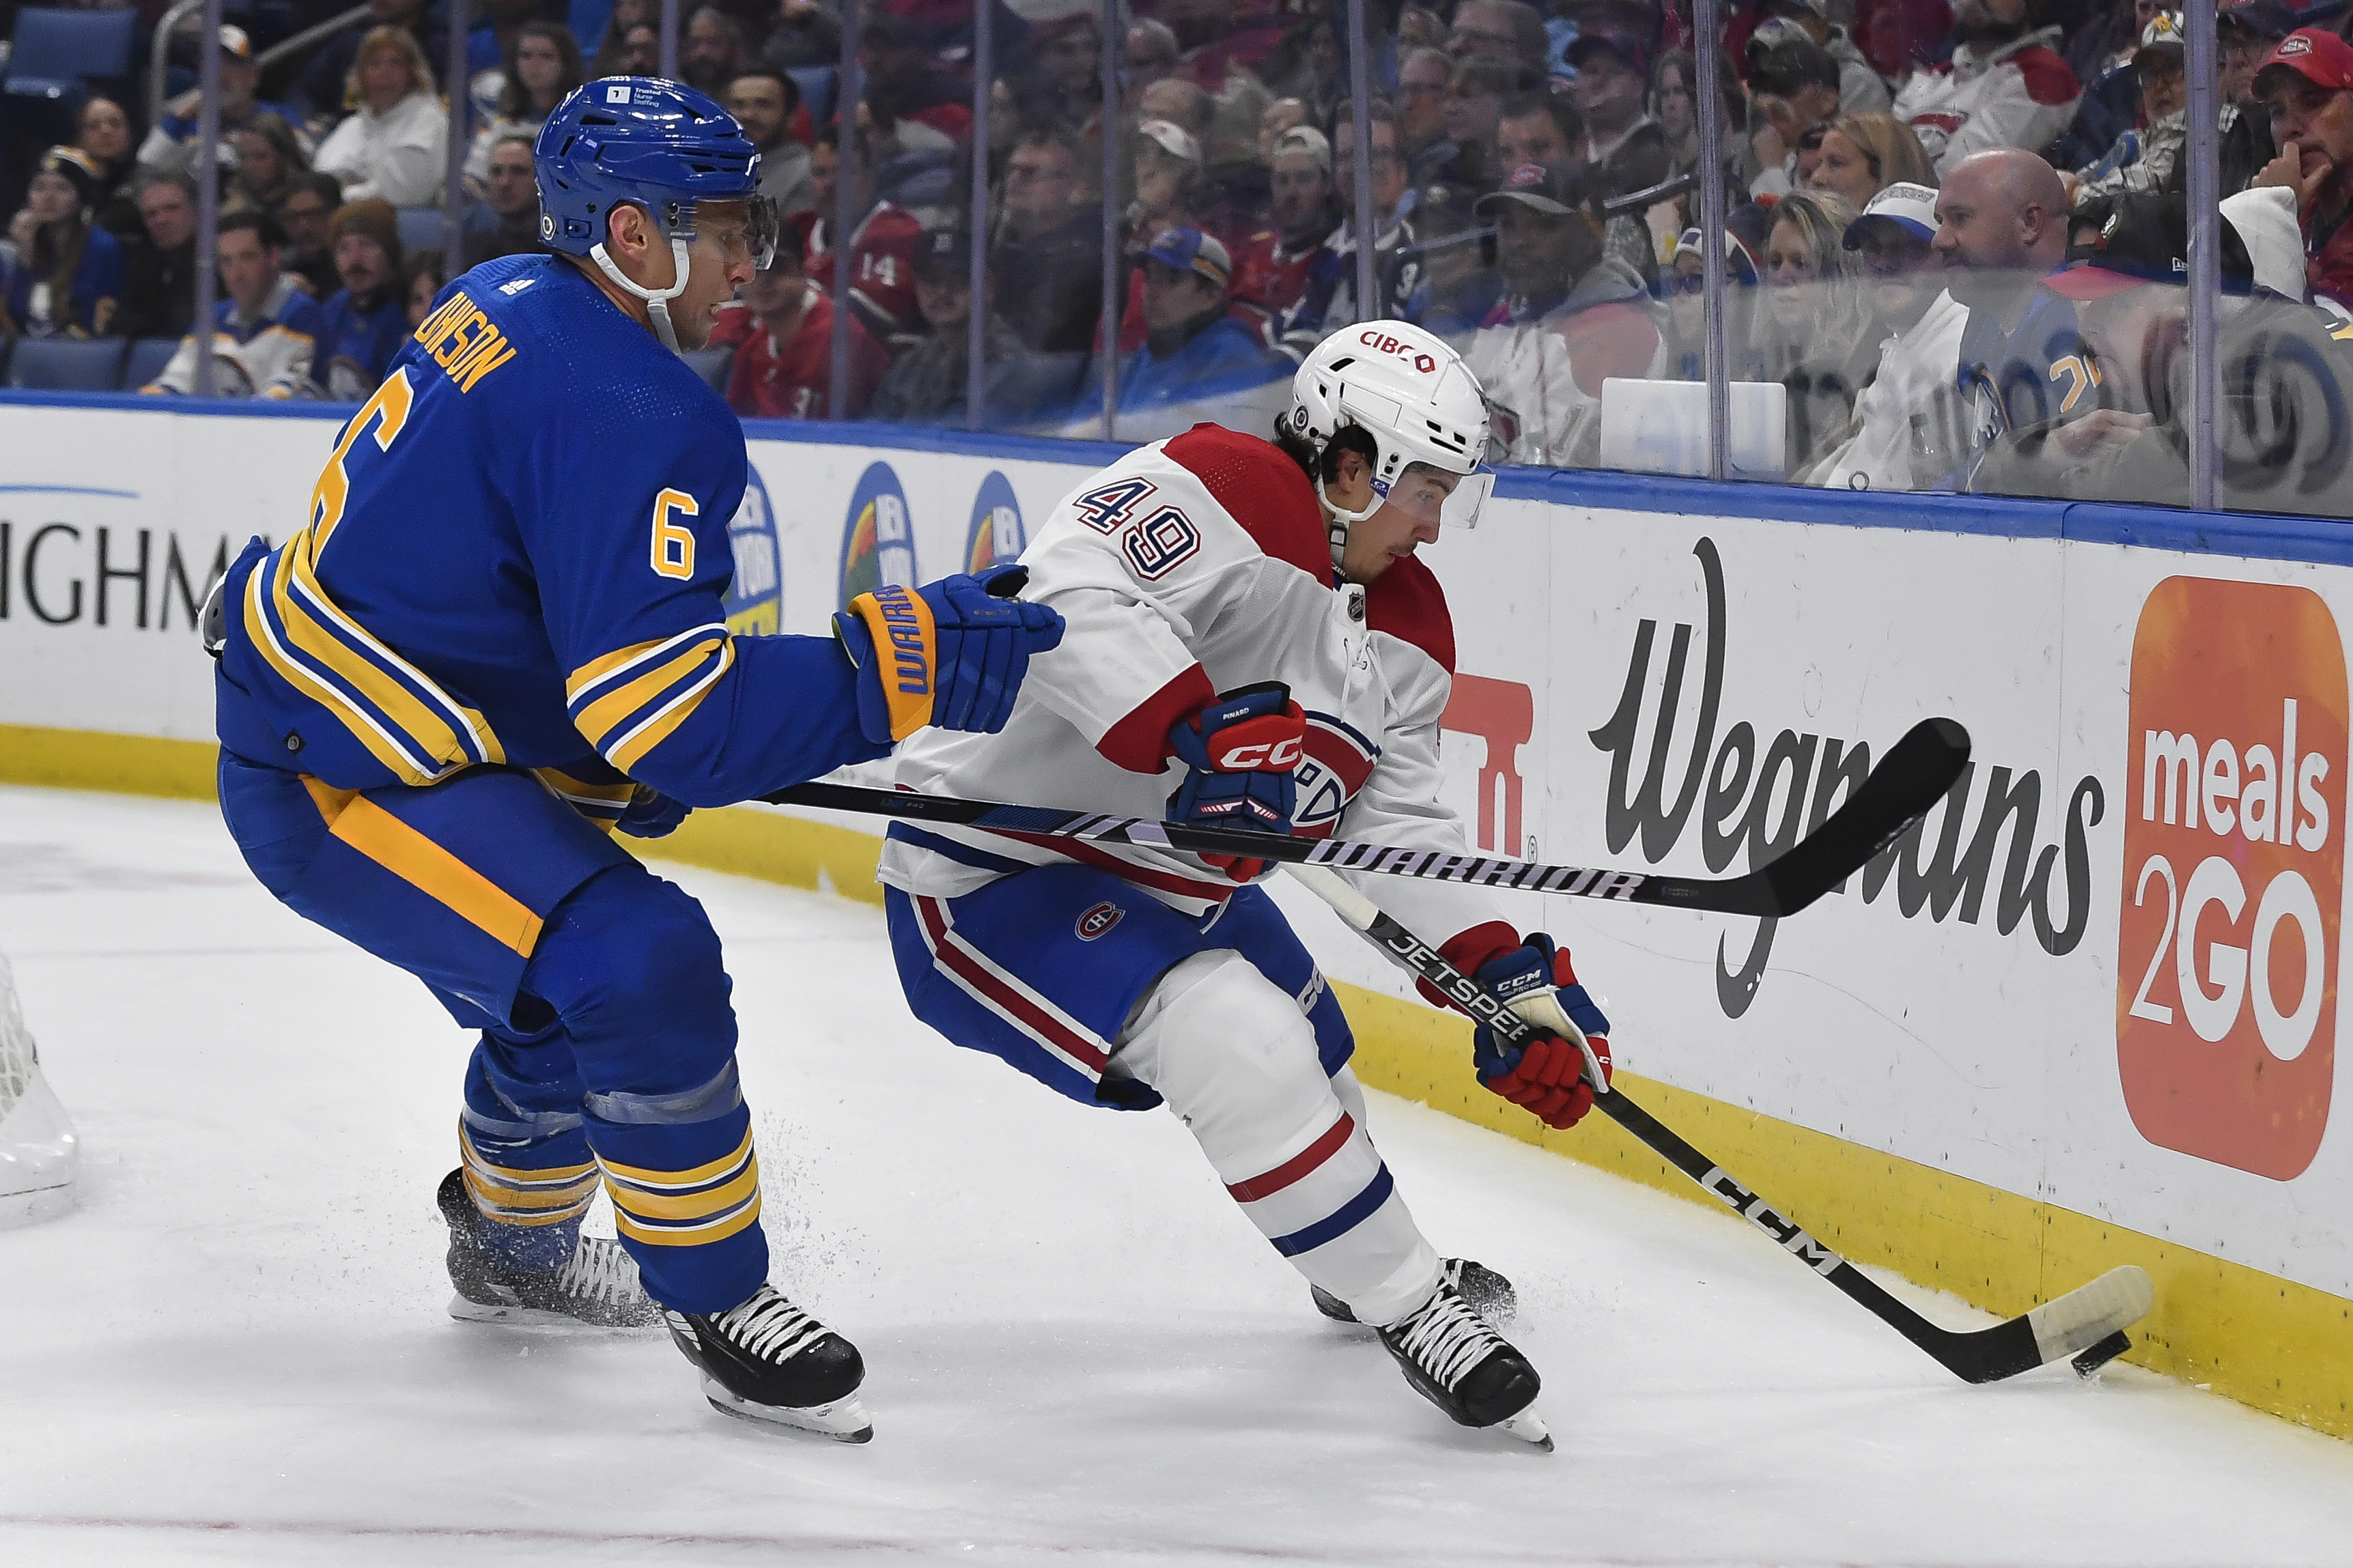 Call of the Wilde: Montreal Canadiens take Buffalo Sabres by surprise with 3-1 win